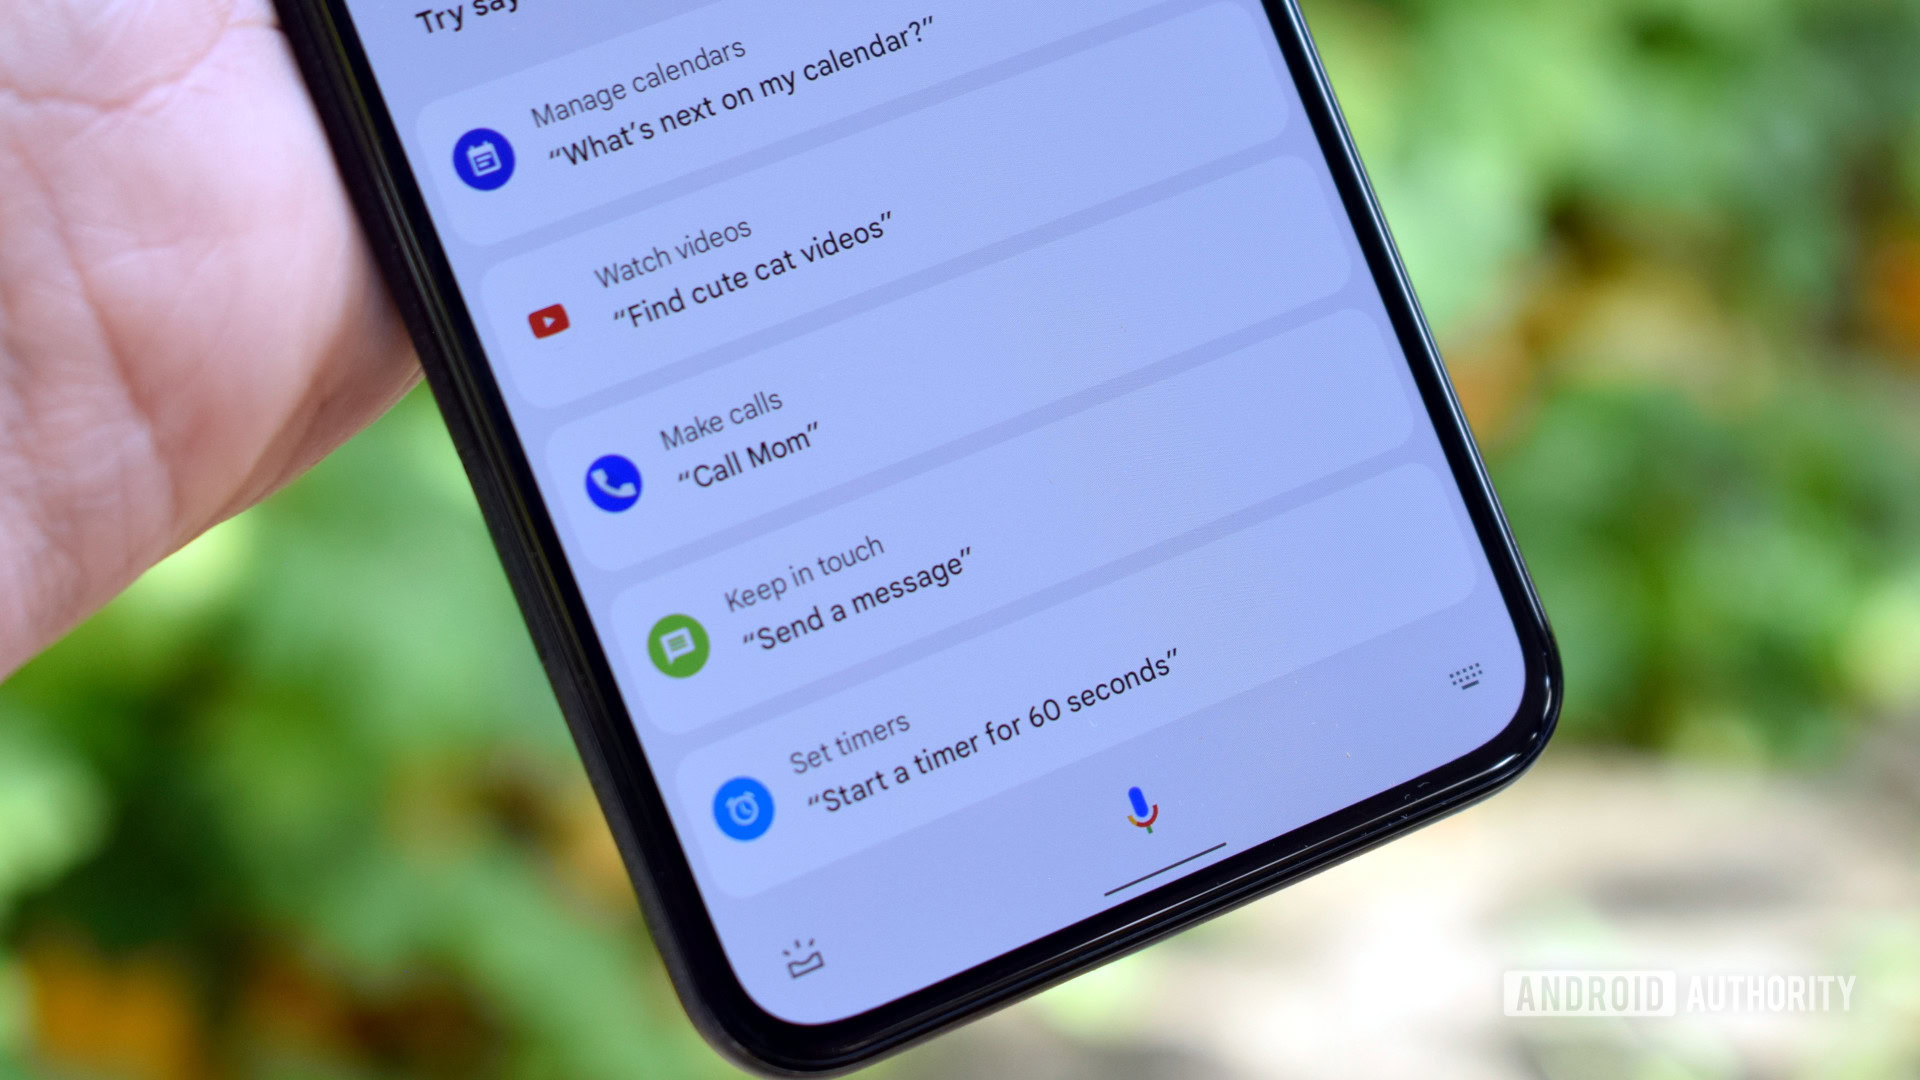 Still using Google Assistant or other voice assistants?